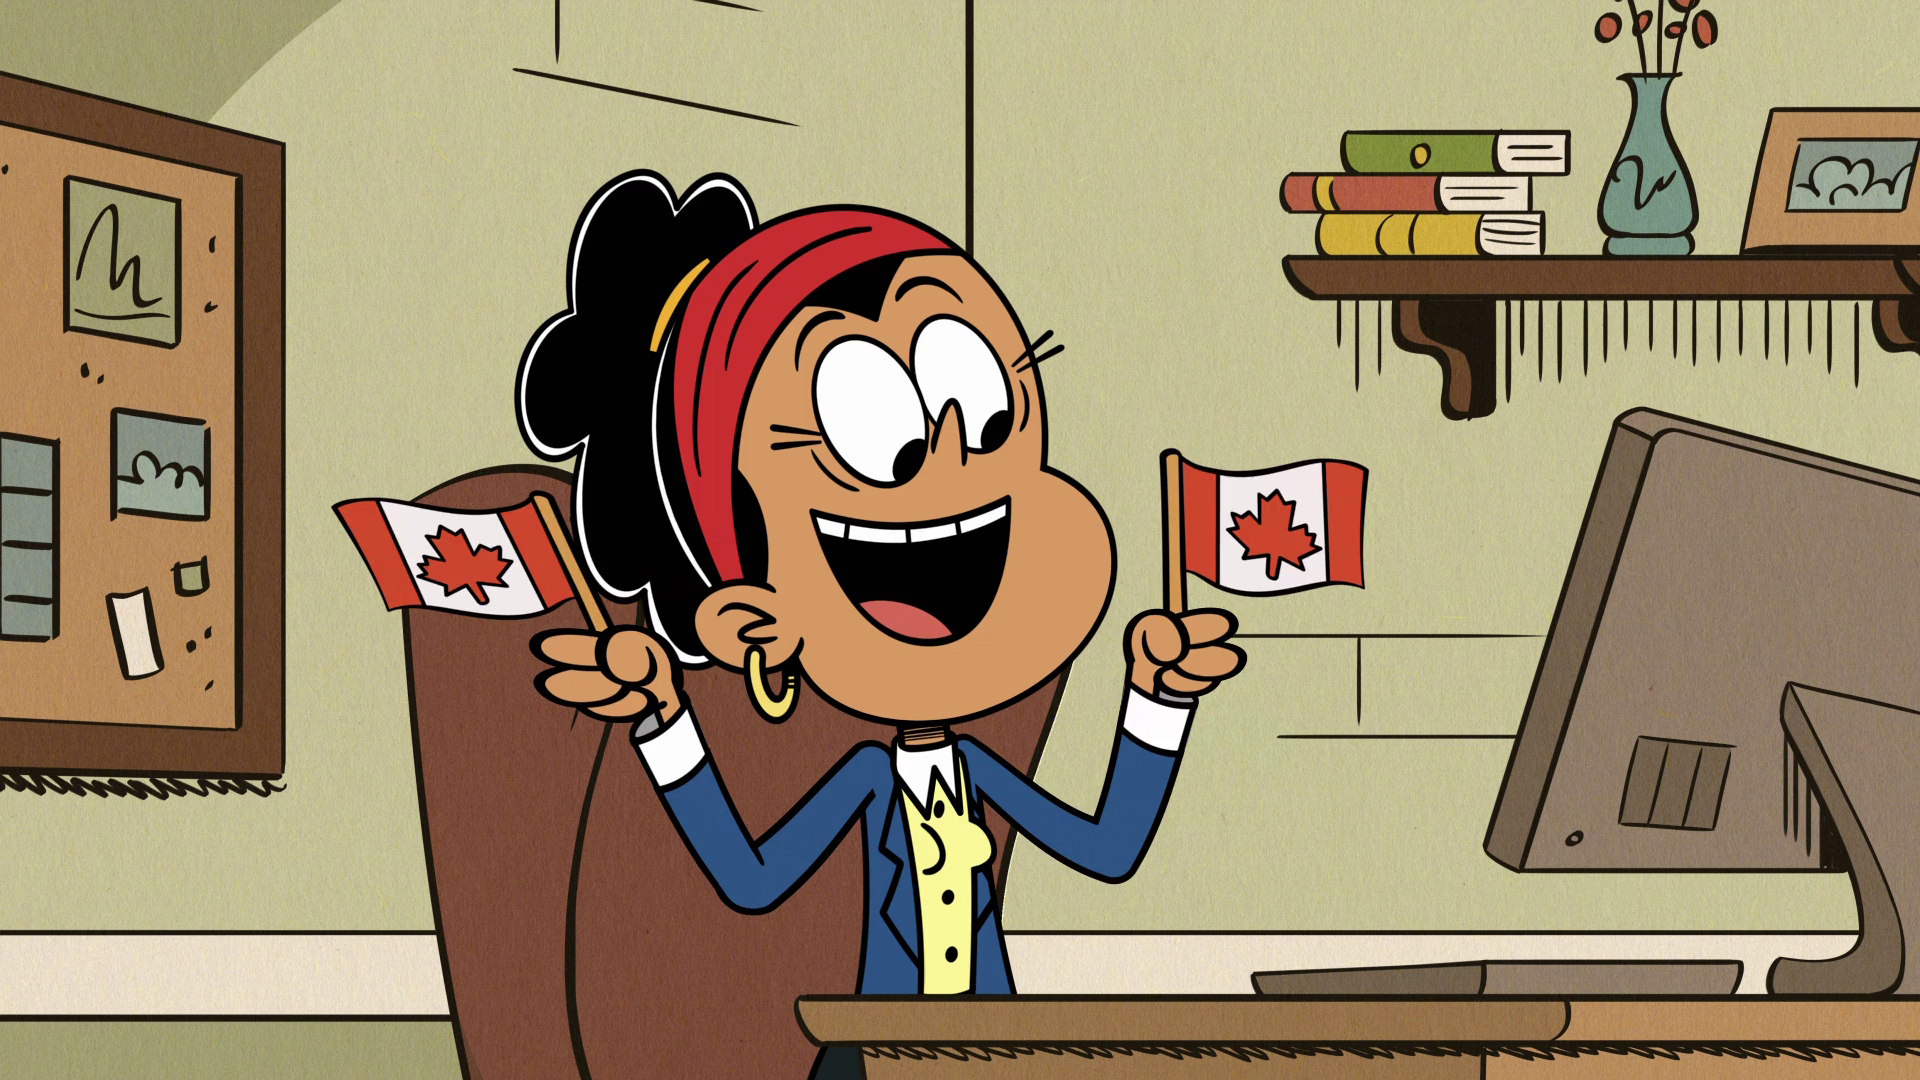 NickALive!: Nickelodeon to Host 'Loud House'-Themed Interactive 'Nickelodeon  Master' Game in France